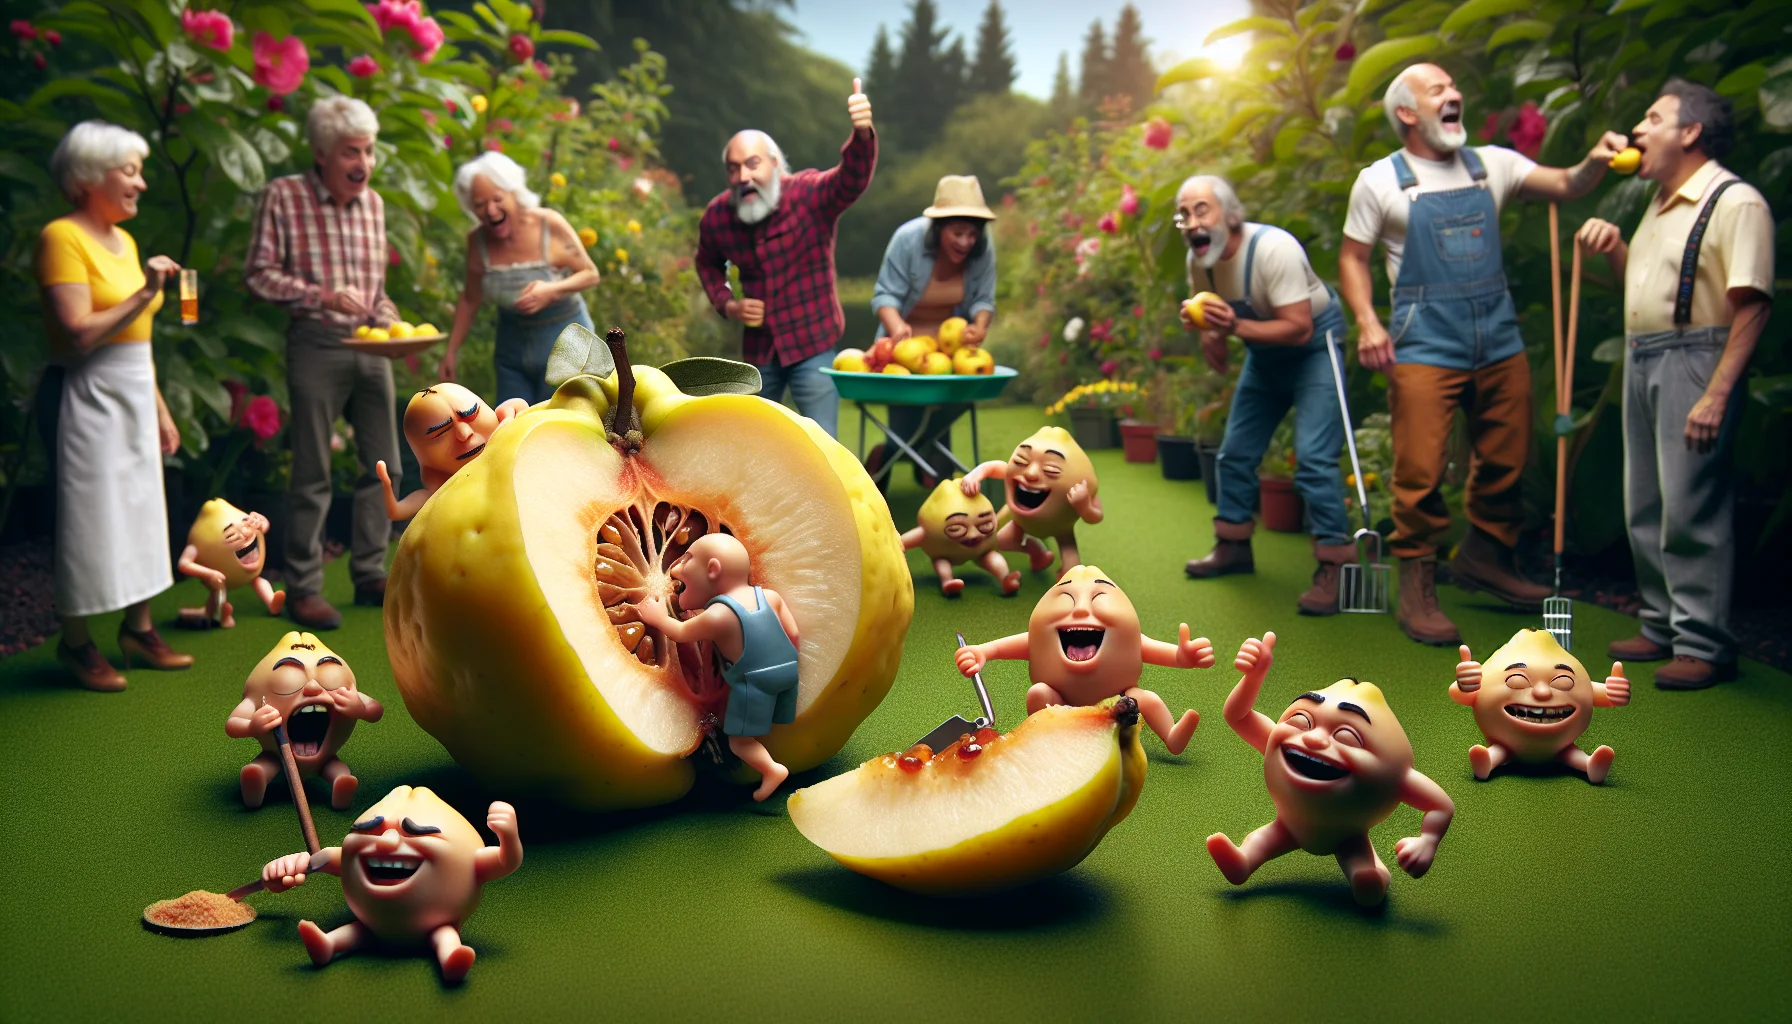 Imagine a humorous scene set in a pristine green garden fully of lively plants, flowers, and buzzing insects. Front and center is a beautifully ripe quince fruit, cut open to reveal its golden yellow interior. Human taste buds, personified as miniature characters of varying genders and ethnicities, are joyfully exploring and experiencing the flavor. Some give thumbs up, while others happily dive into the fruit, showcasing the sweet and tangy taste of the quince. As a backdrop, diverse men and women across multiple descents are laughing and gardening, looking appreciatively at the comedic taste buds enticing them to enjoy the fruits of their labor.